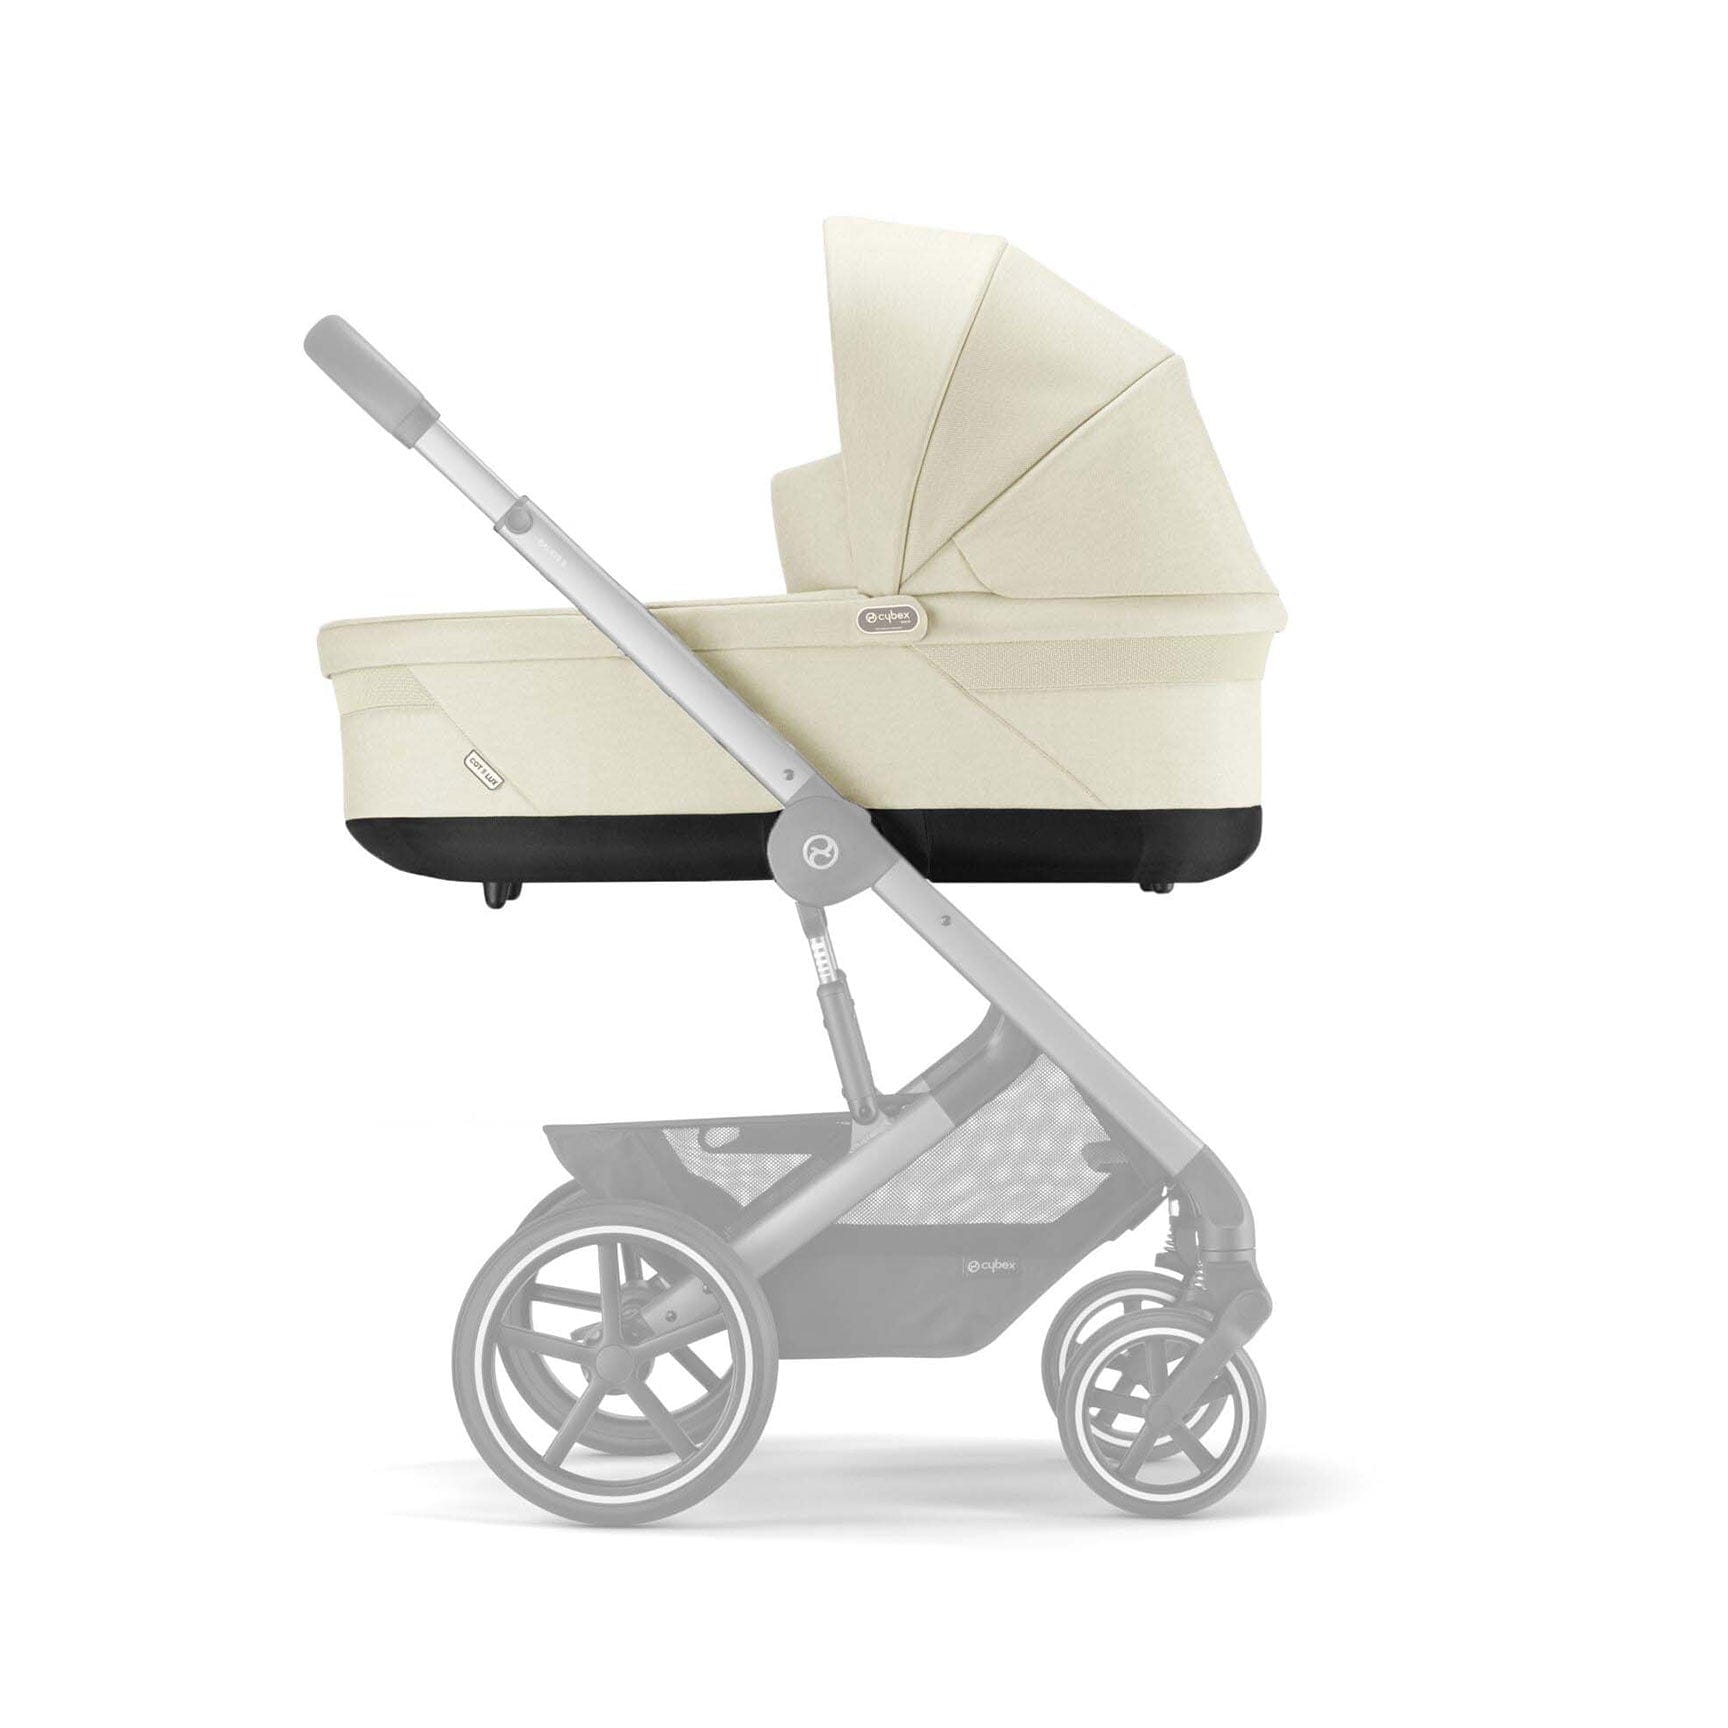 Cybex Balios Luxury Bundle in Taupe/Seashell Beige Travel Systems 127462-TPE-SEA-BEI 4063846318124